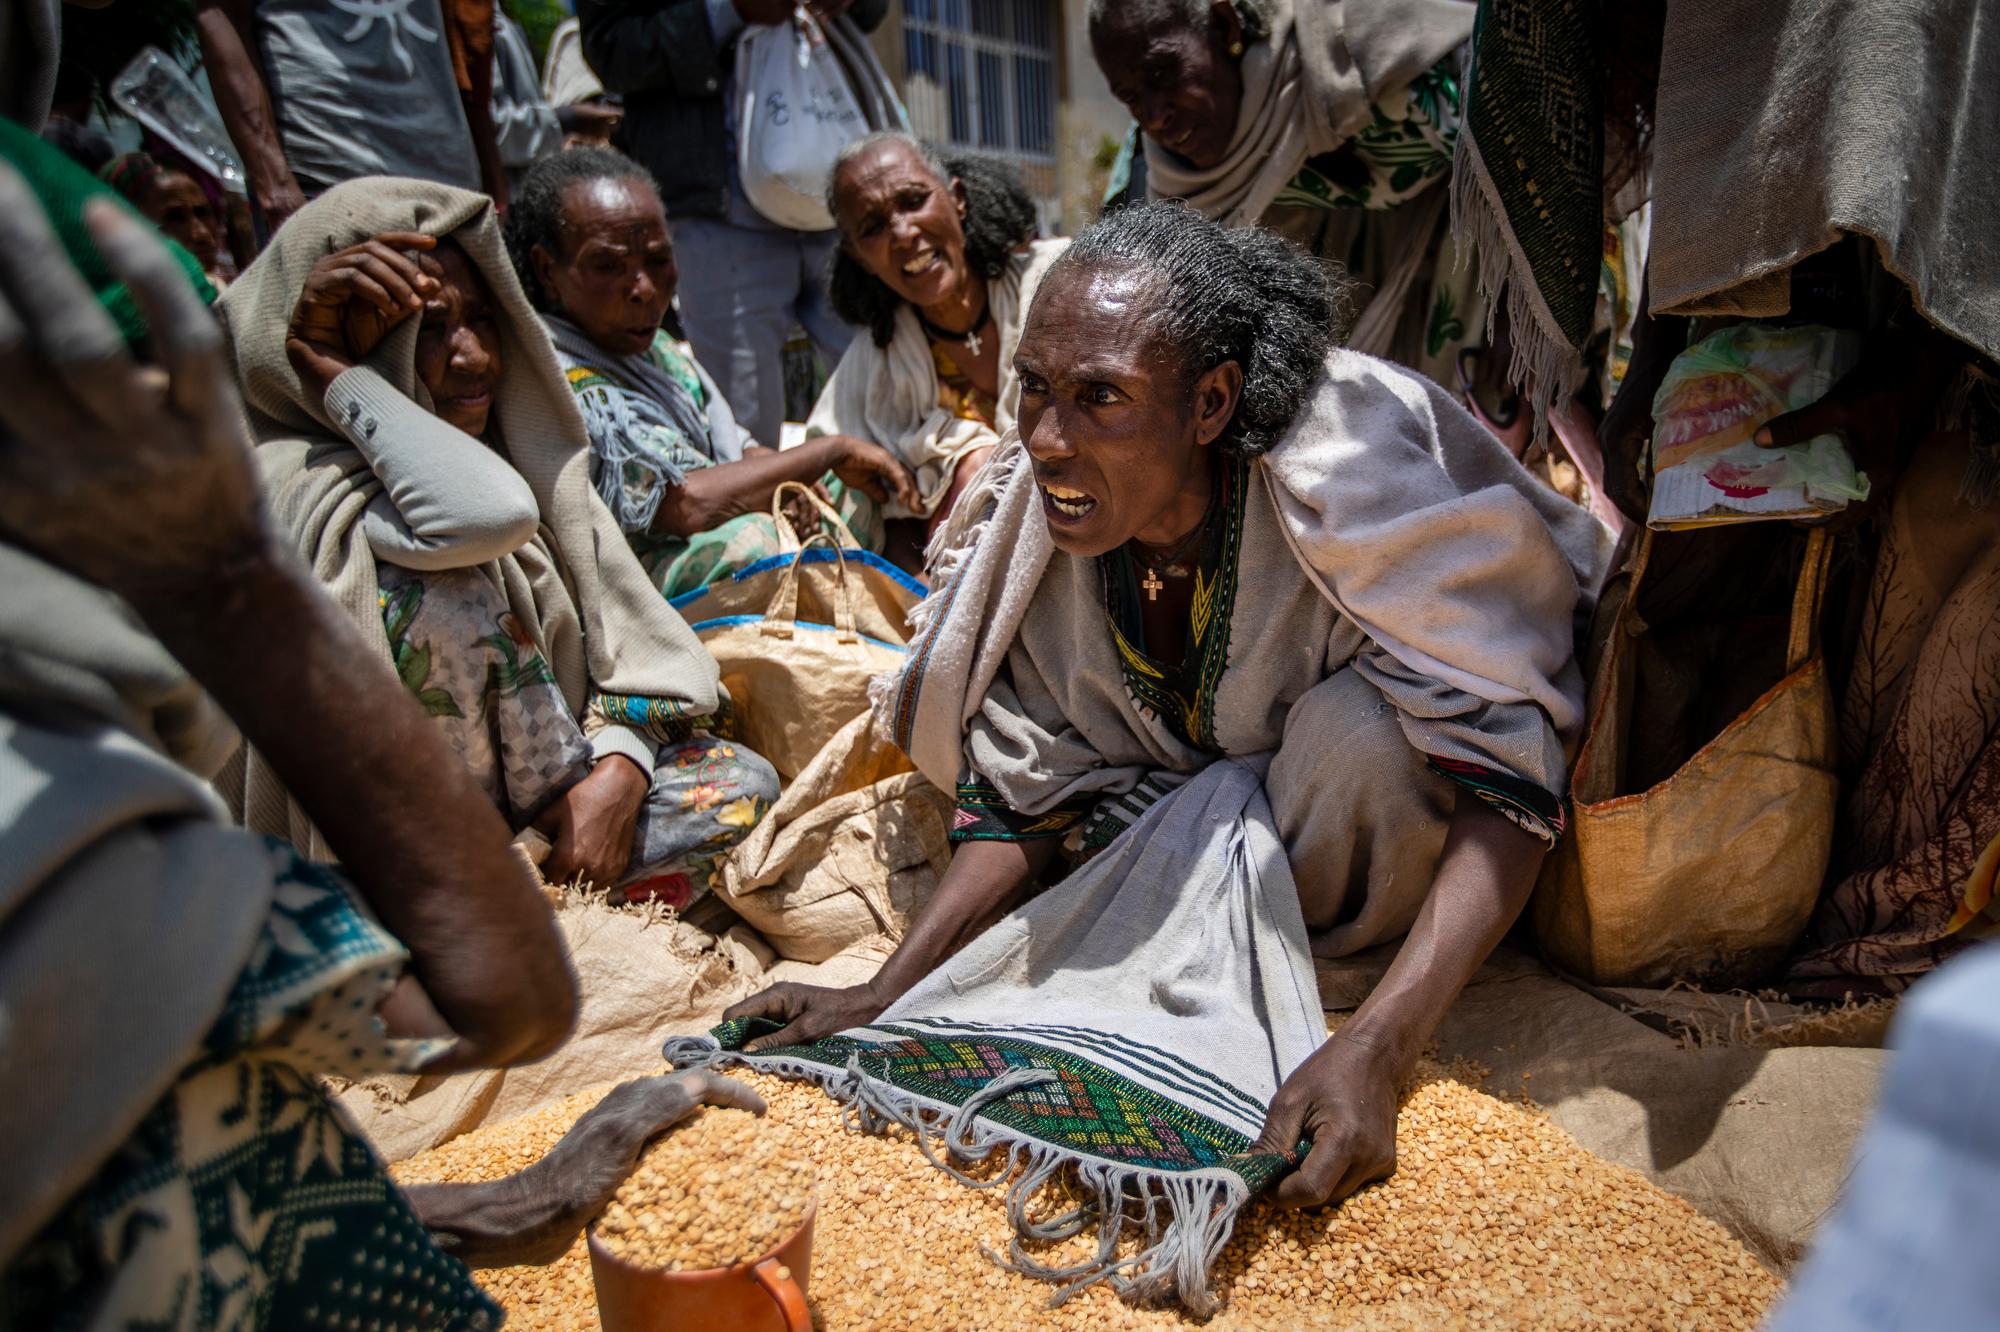 An Ethiopian woman argues with others over the allocation of yellow split peas distributed by the Relief Society of Tigray in the town of Agula, in the Tigray region of northern Ethiopia, on May 8, 2021. In war-torn Tigray, it is not just that people are starving; it is that many are being starved, The Associated Press found. (AP Photo/Ben Curtis)